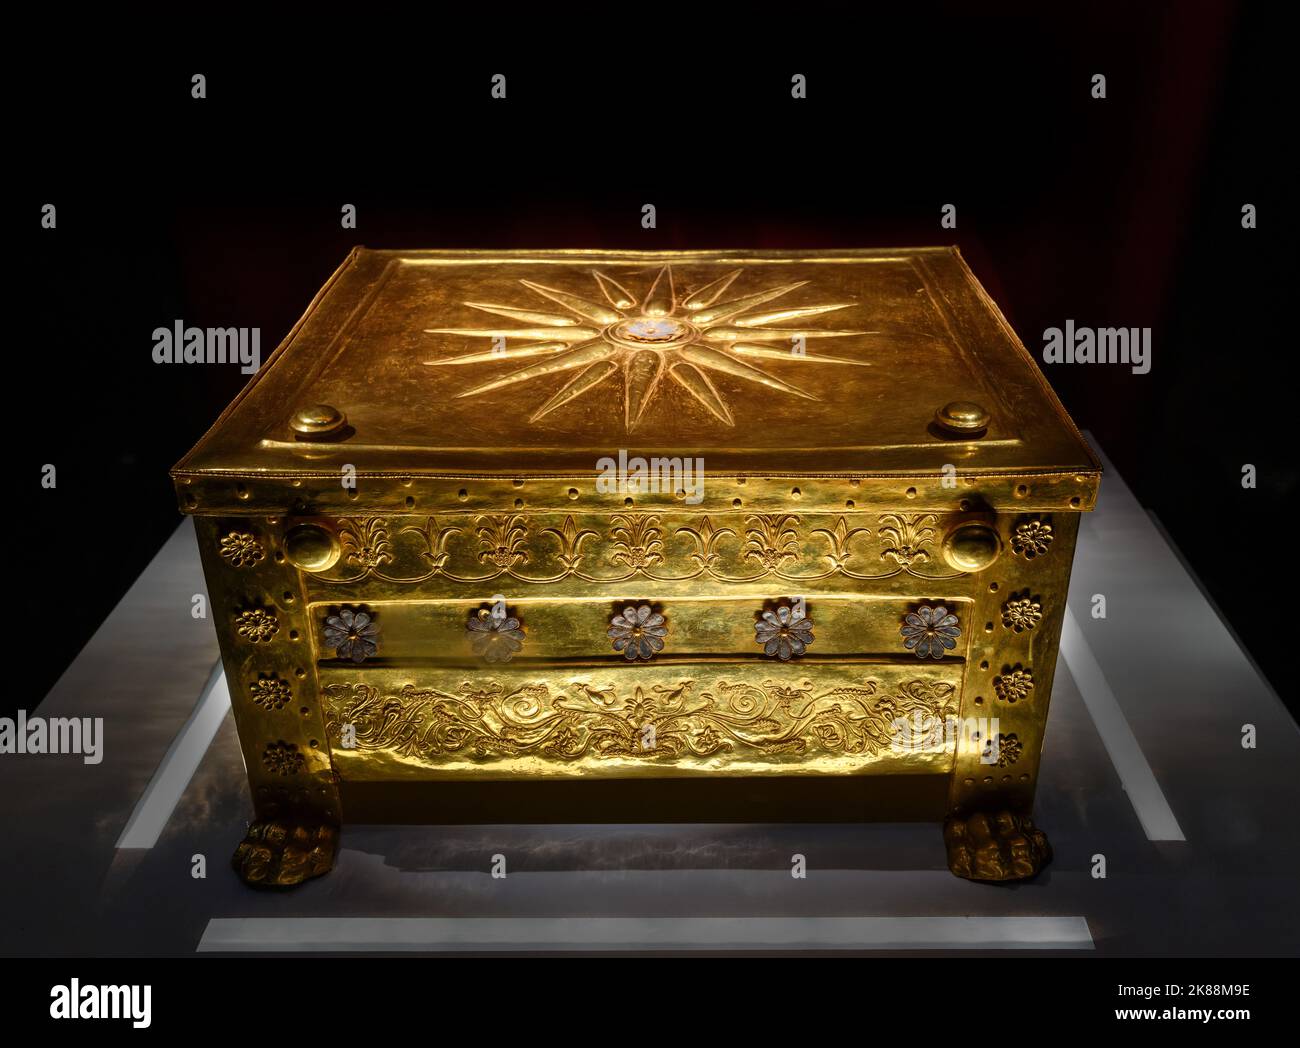 The gold burial casket for the bones of Kind Philip II of Macedon,  Museum of the Royal Tombs of Aigai, Vergina, Macedonia, Greece Stock Photo